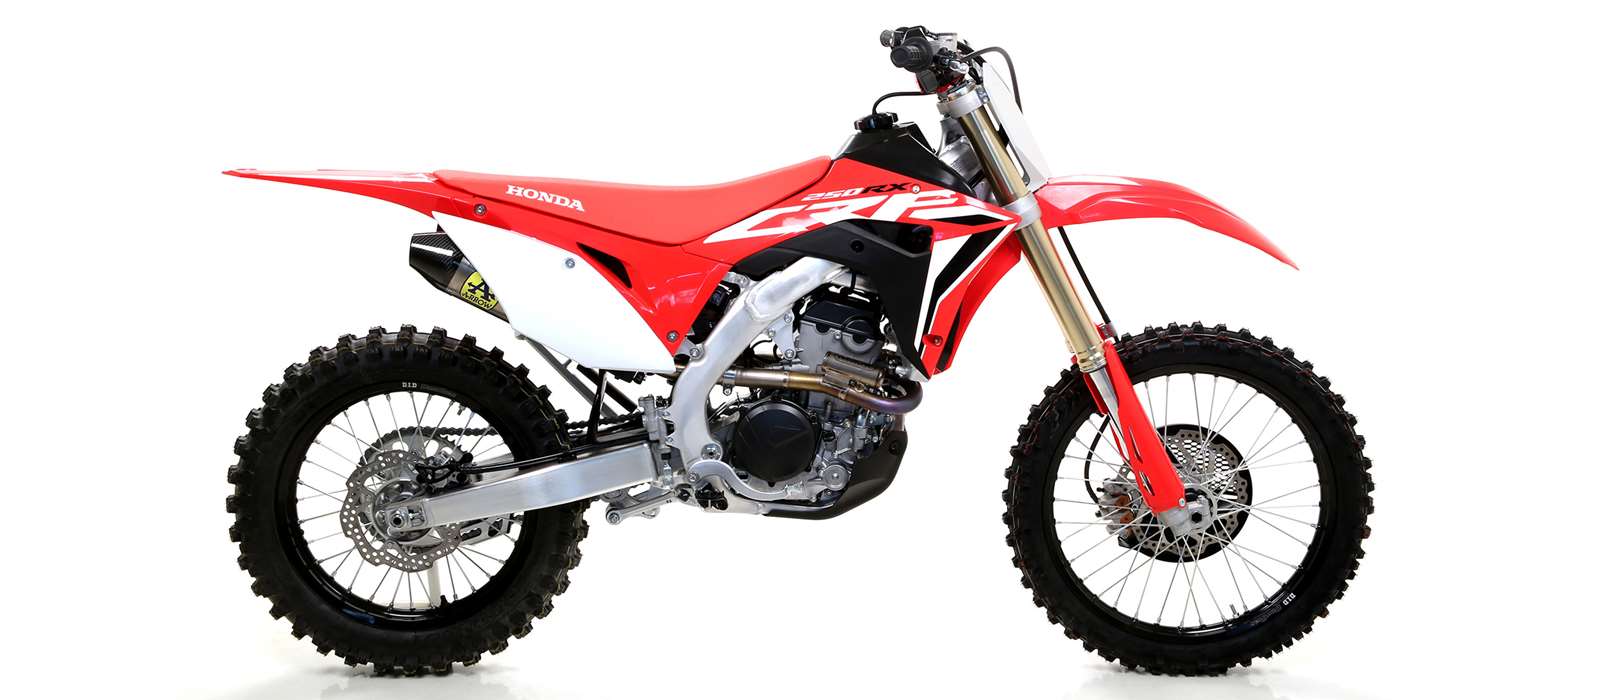 Arrow Mx competition race exhaust for honda crf